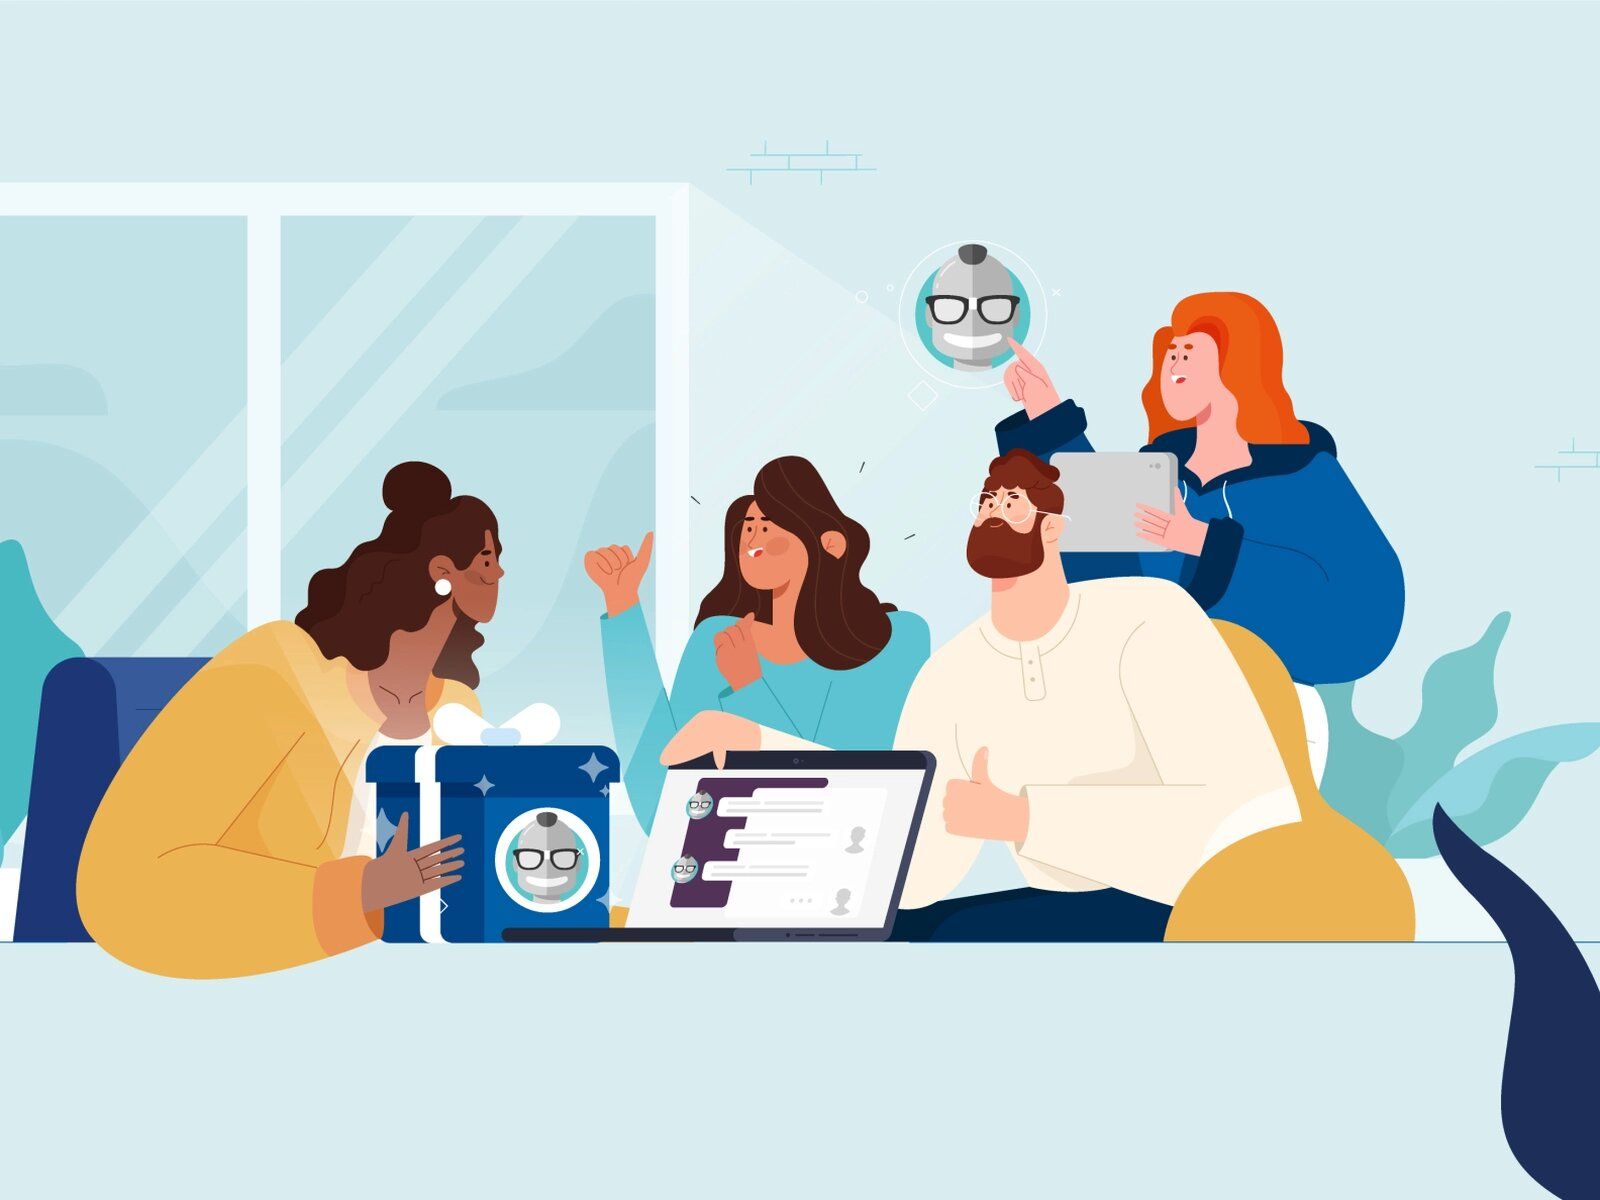 In addition to excellent technical skills, your team should have good soft skills (*image by [Carolina Contreras](https://dribbble.com/carolinacont){ rel="nofollow" target="_blank" .default-md}*)